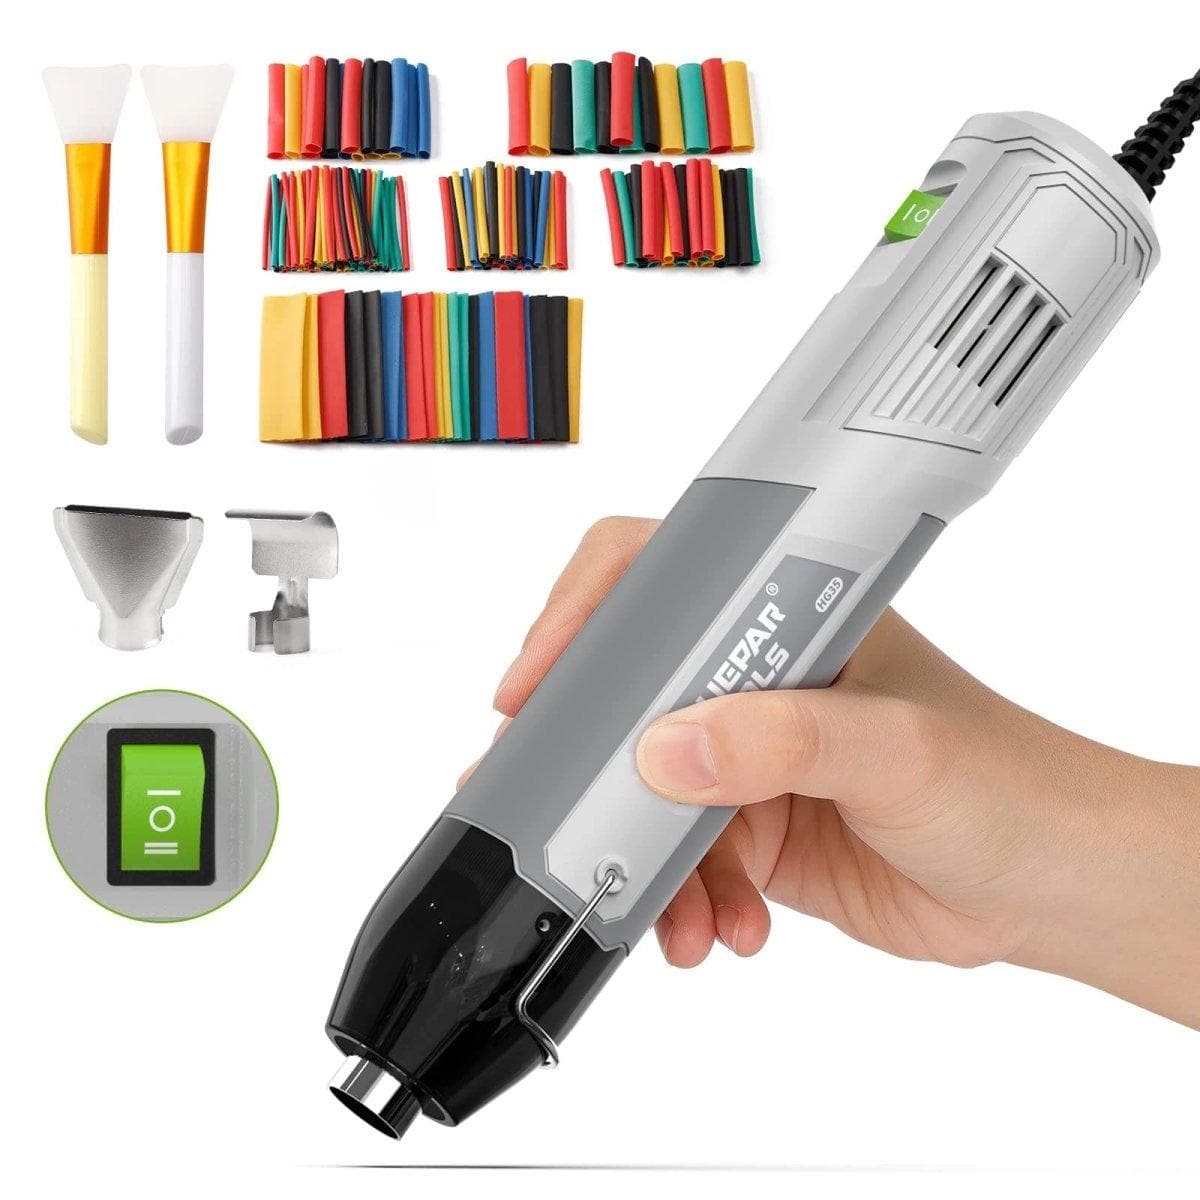 Huepar Tools Mini Dual Temp Heat Gun for Crafts with Shrink Wrapping, Embossing, Candle Making Accessories, Including Heat Shrink Tubes, Silicon Brushes, and Nozzles5